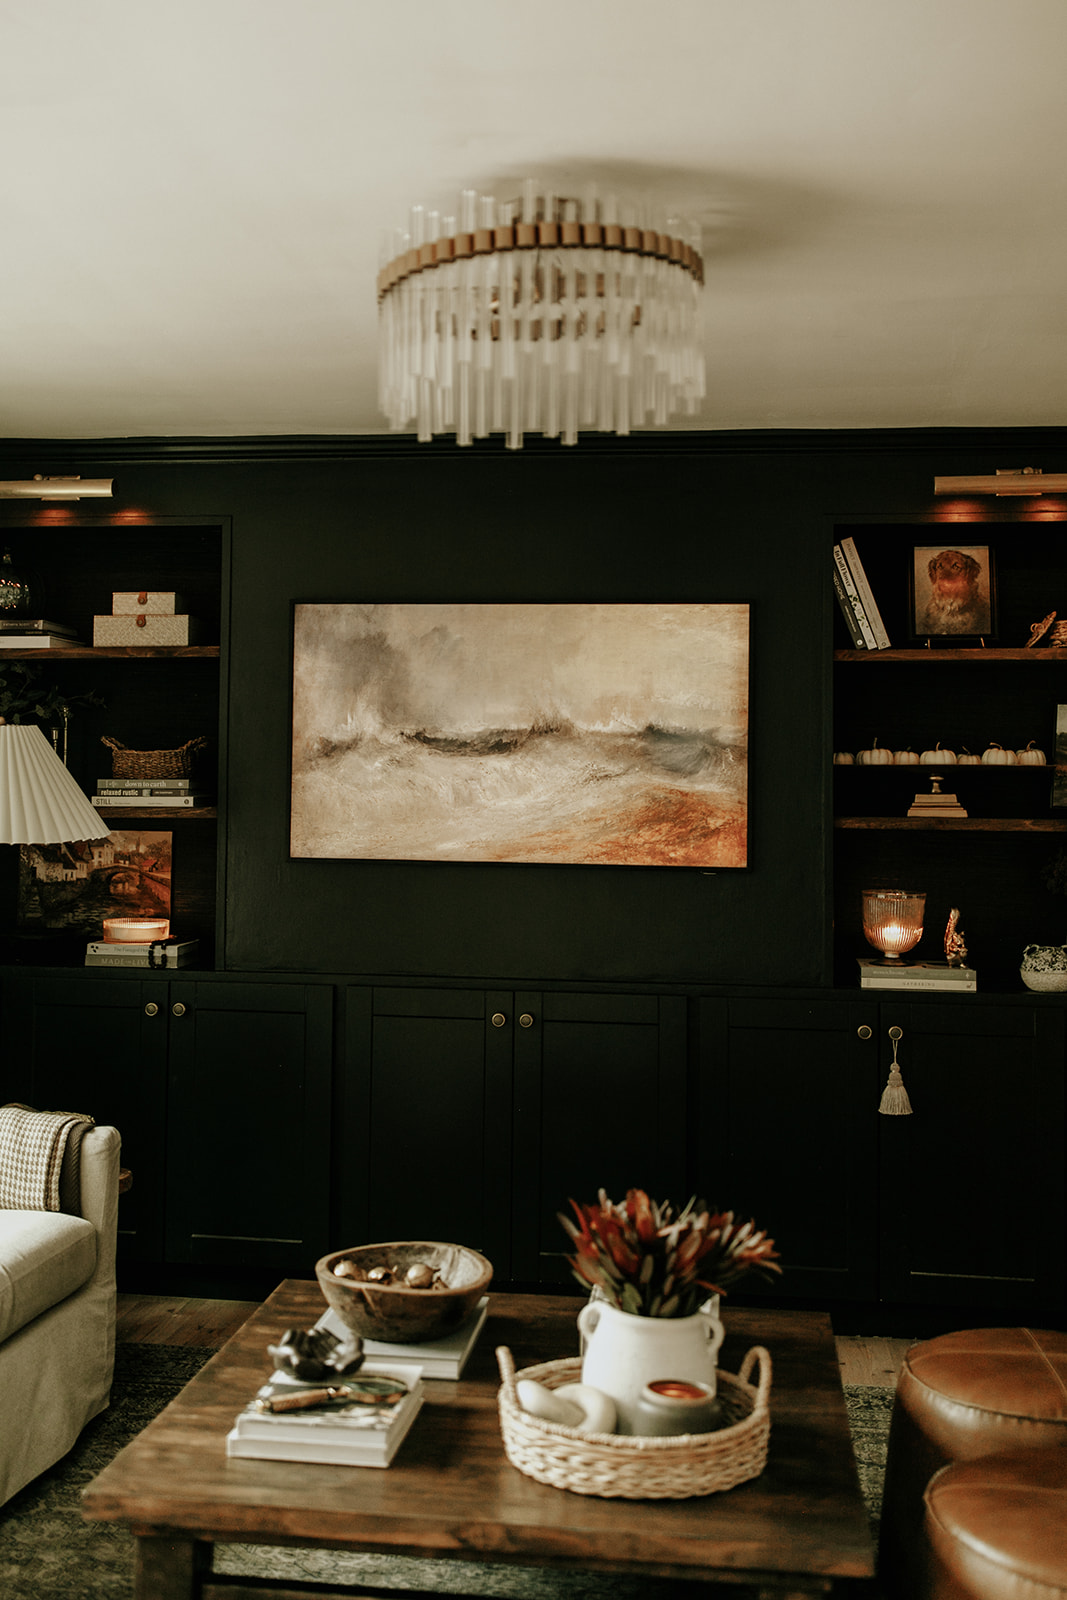 A Samsung Frame TV is mounted on a wall in between built in cabinets that are recessed. In front of the cabinet wall is a well decorated coffee table and cozy couch.